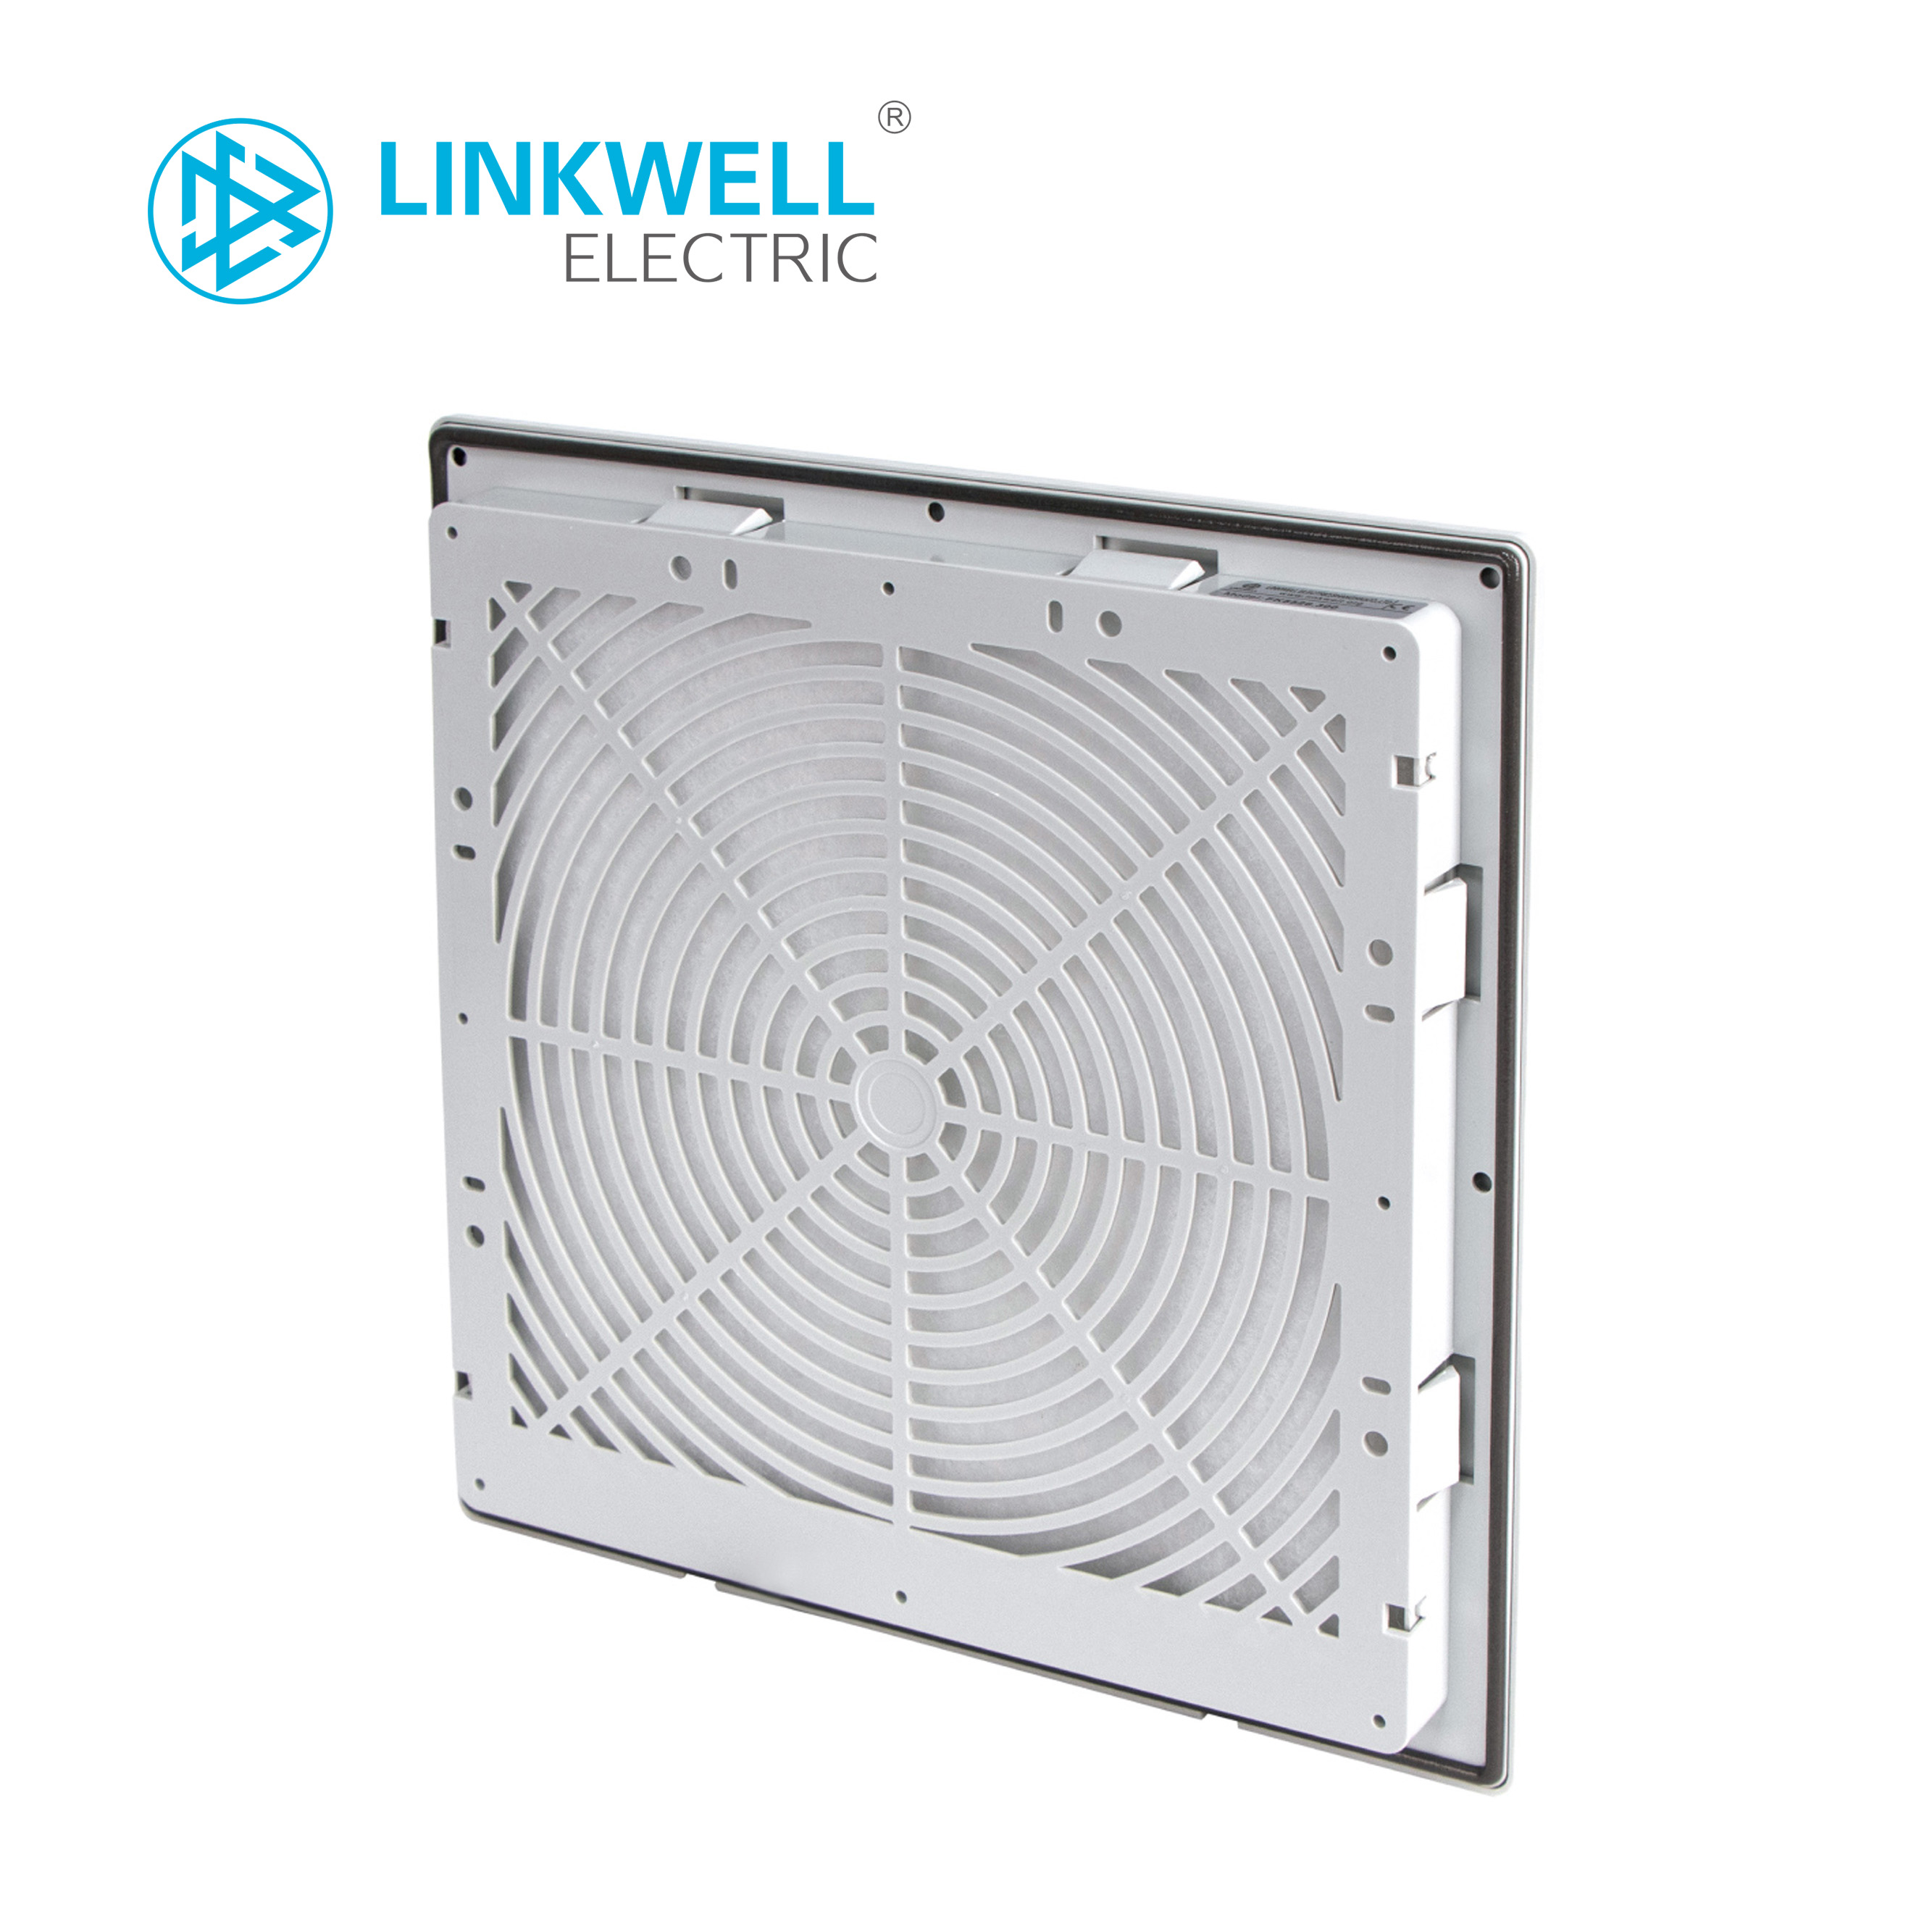 FK5526-Imported ultra-thin ventilation filter group